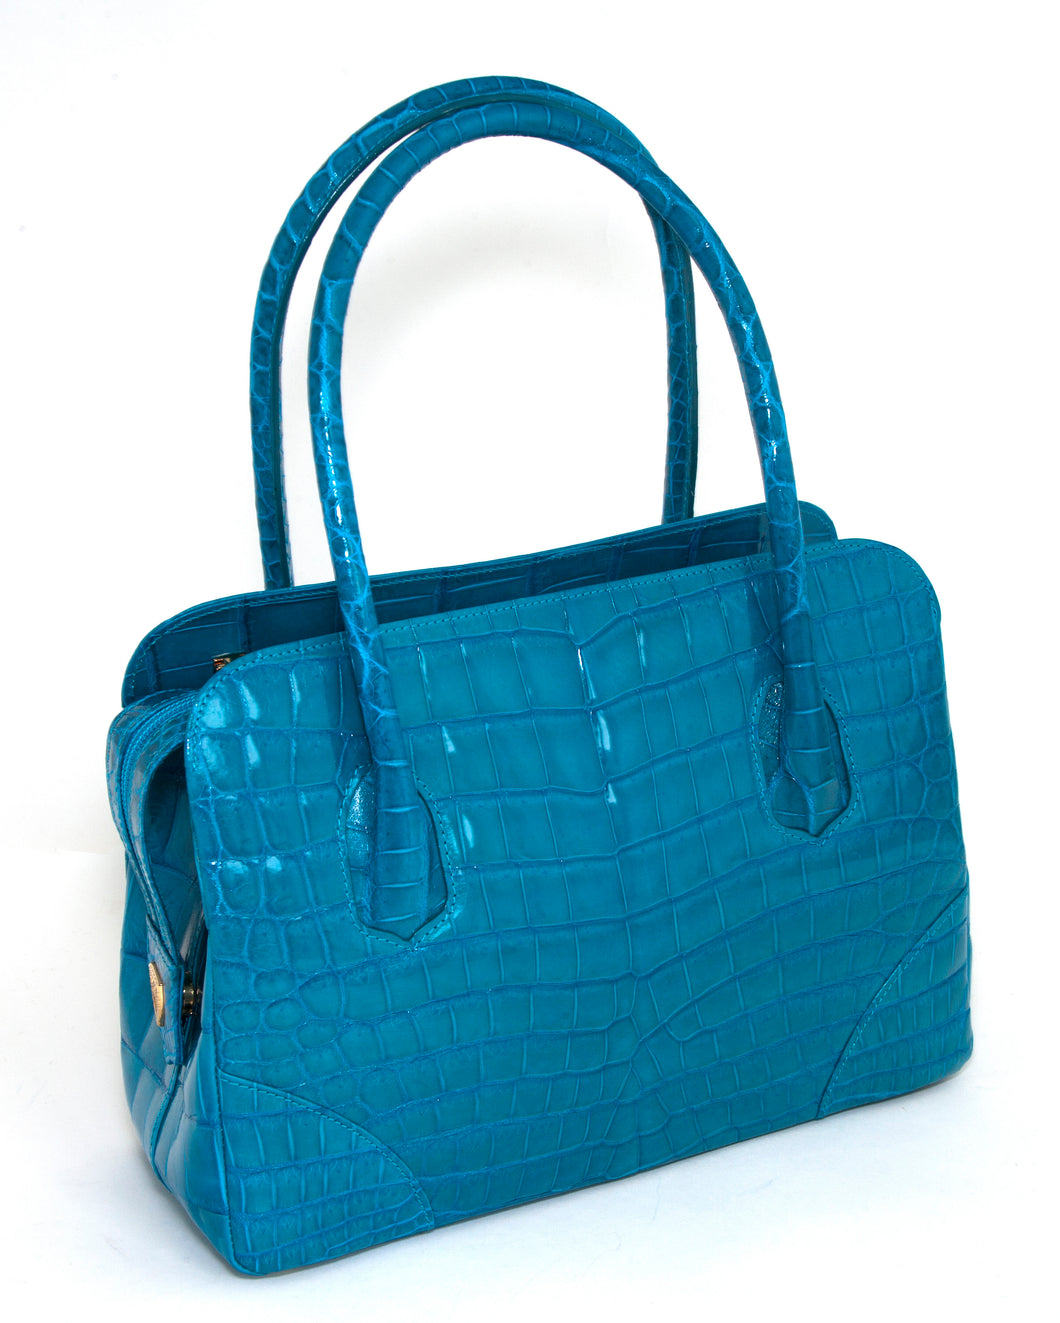 Petite Jet Tote in Turquoise